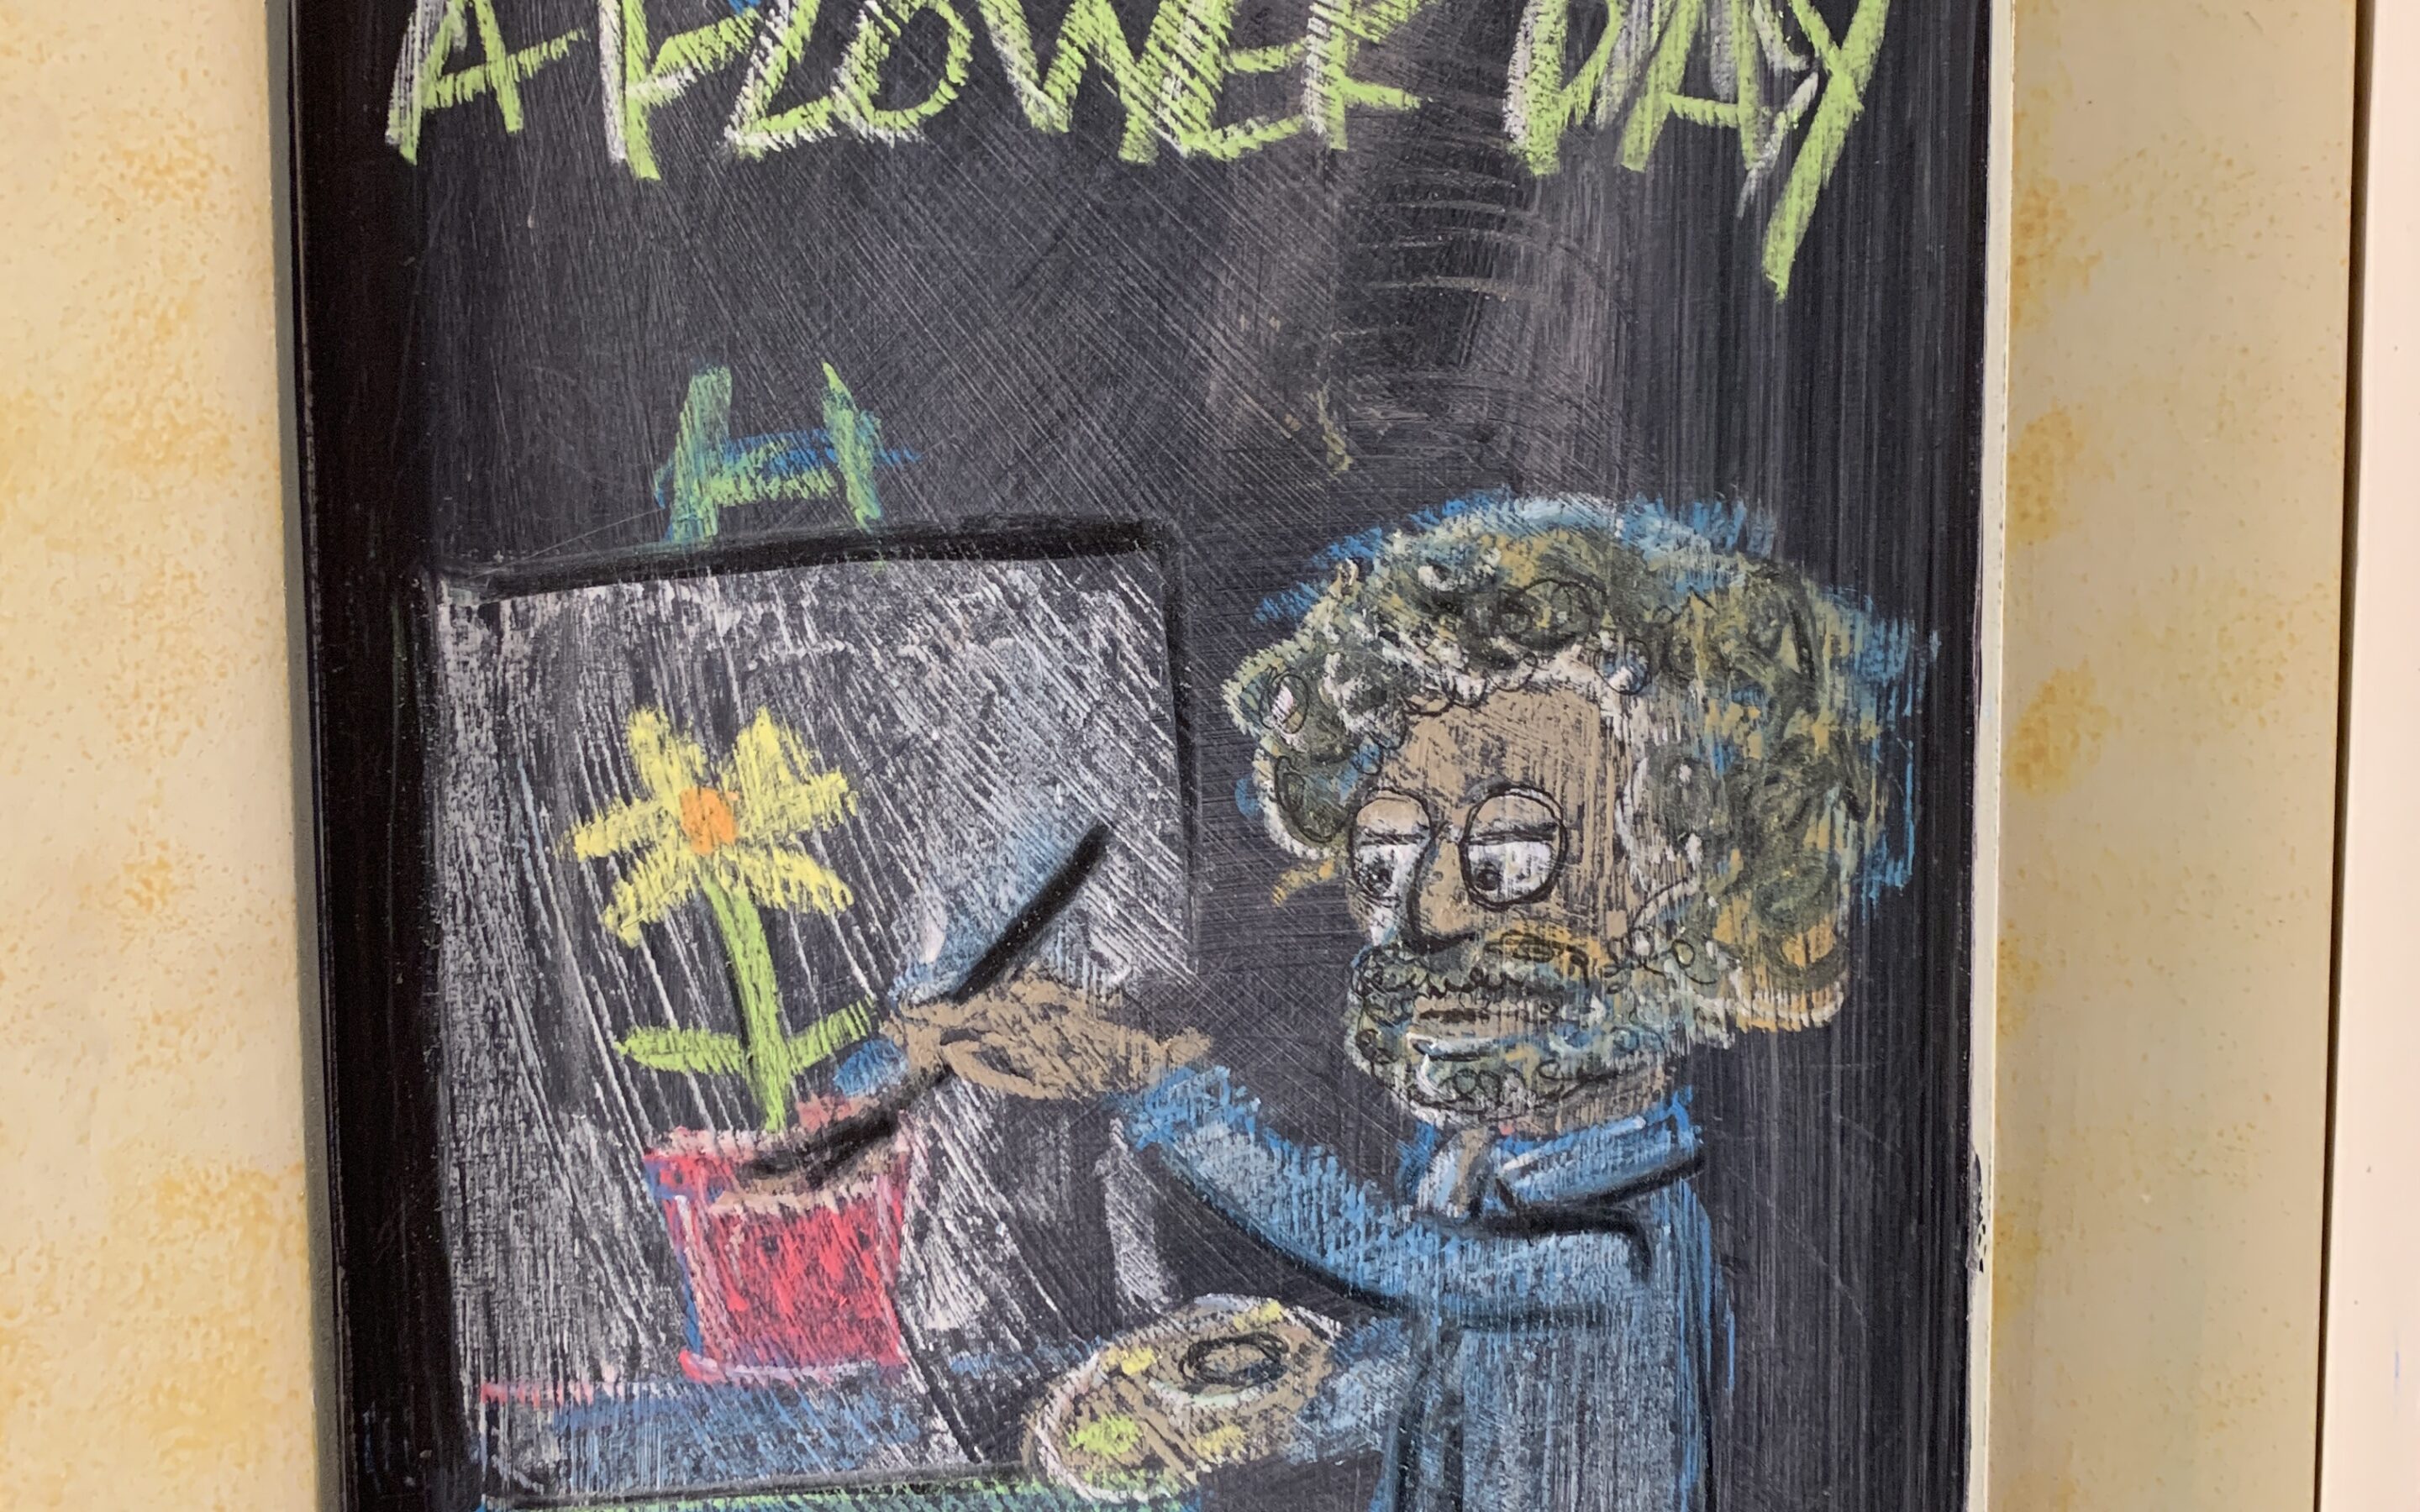 National plant a flower day